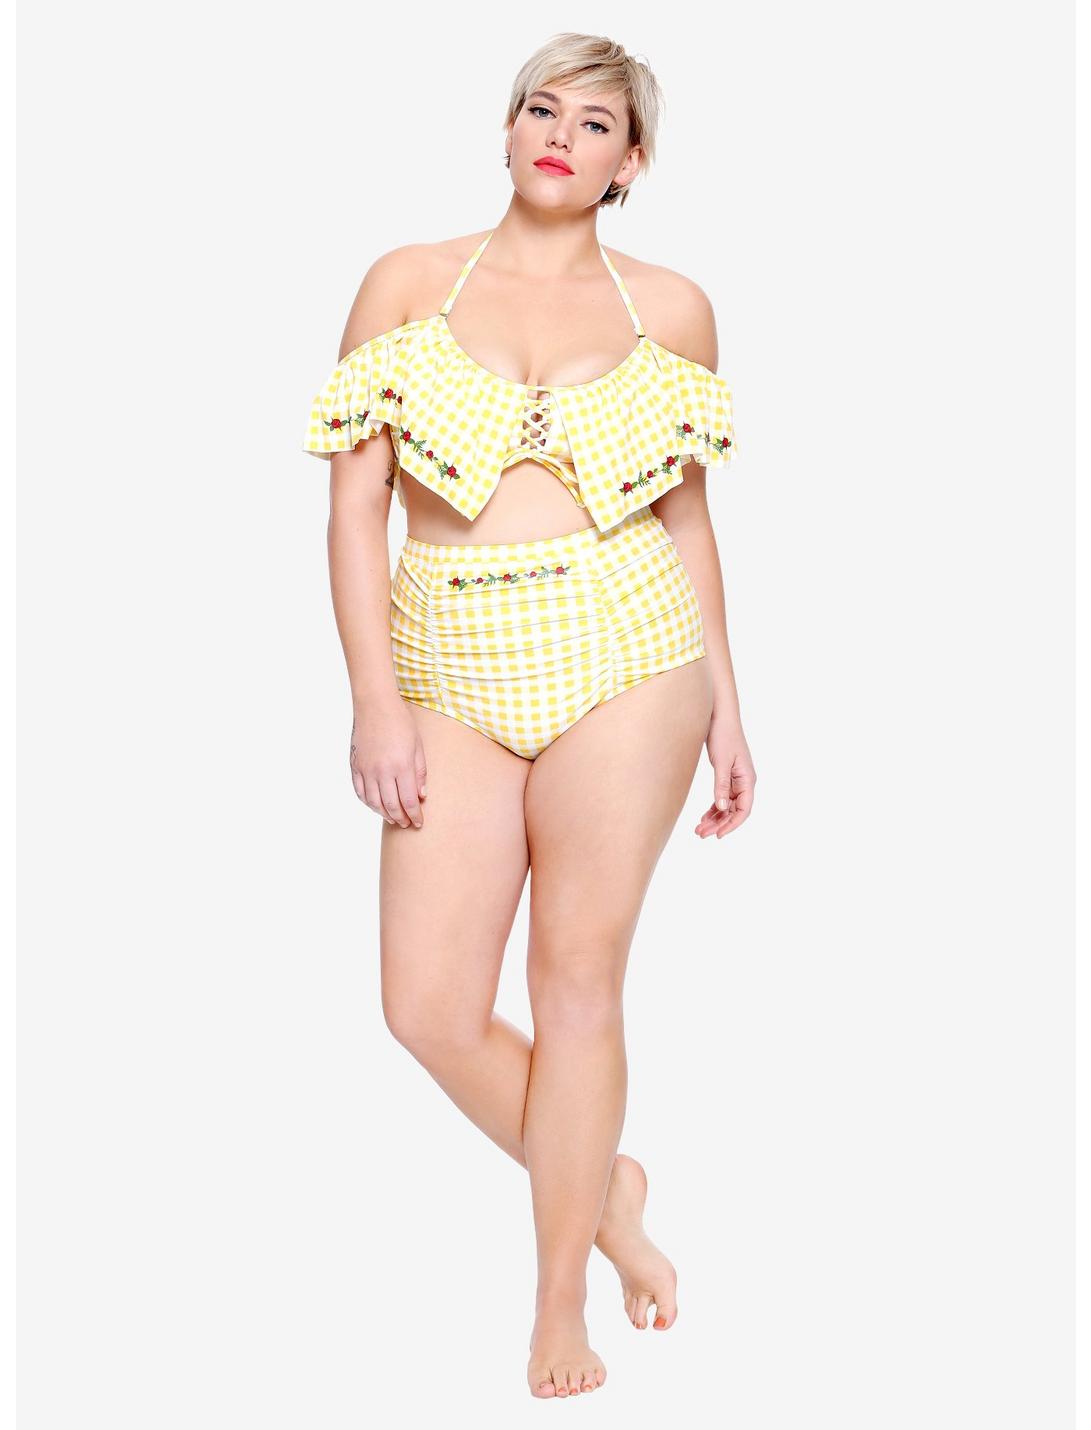 Disney Beauty And The Beast Belle Gingham Swim Bottoms Plus Size, YELLOW, hi-res